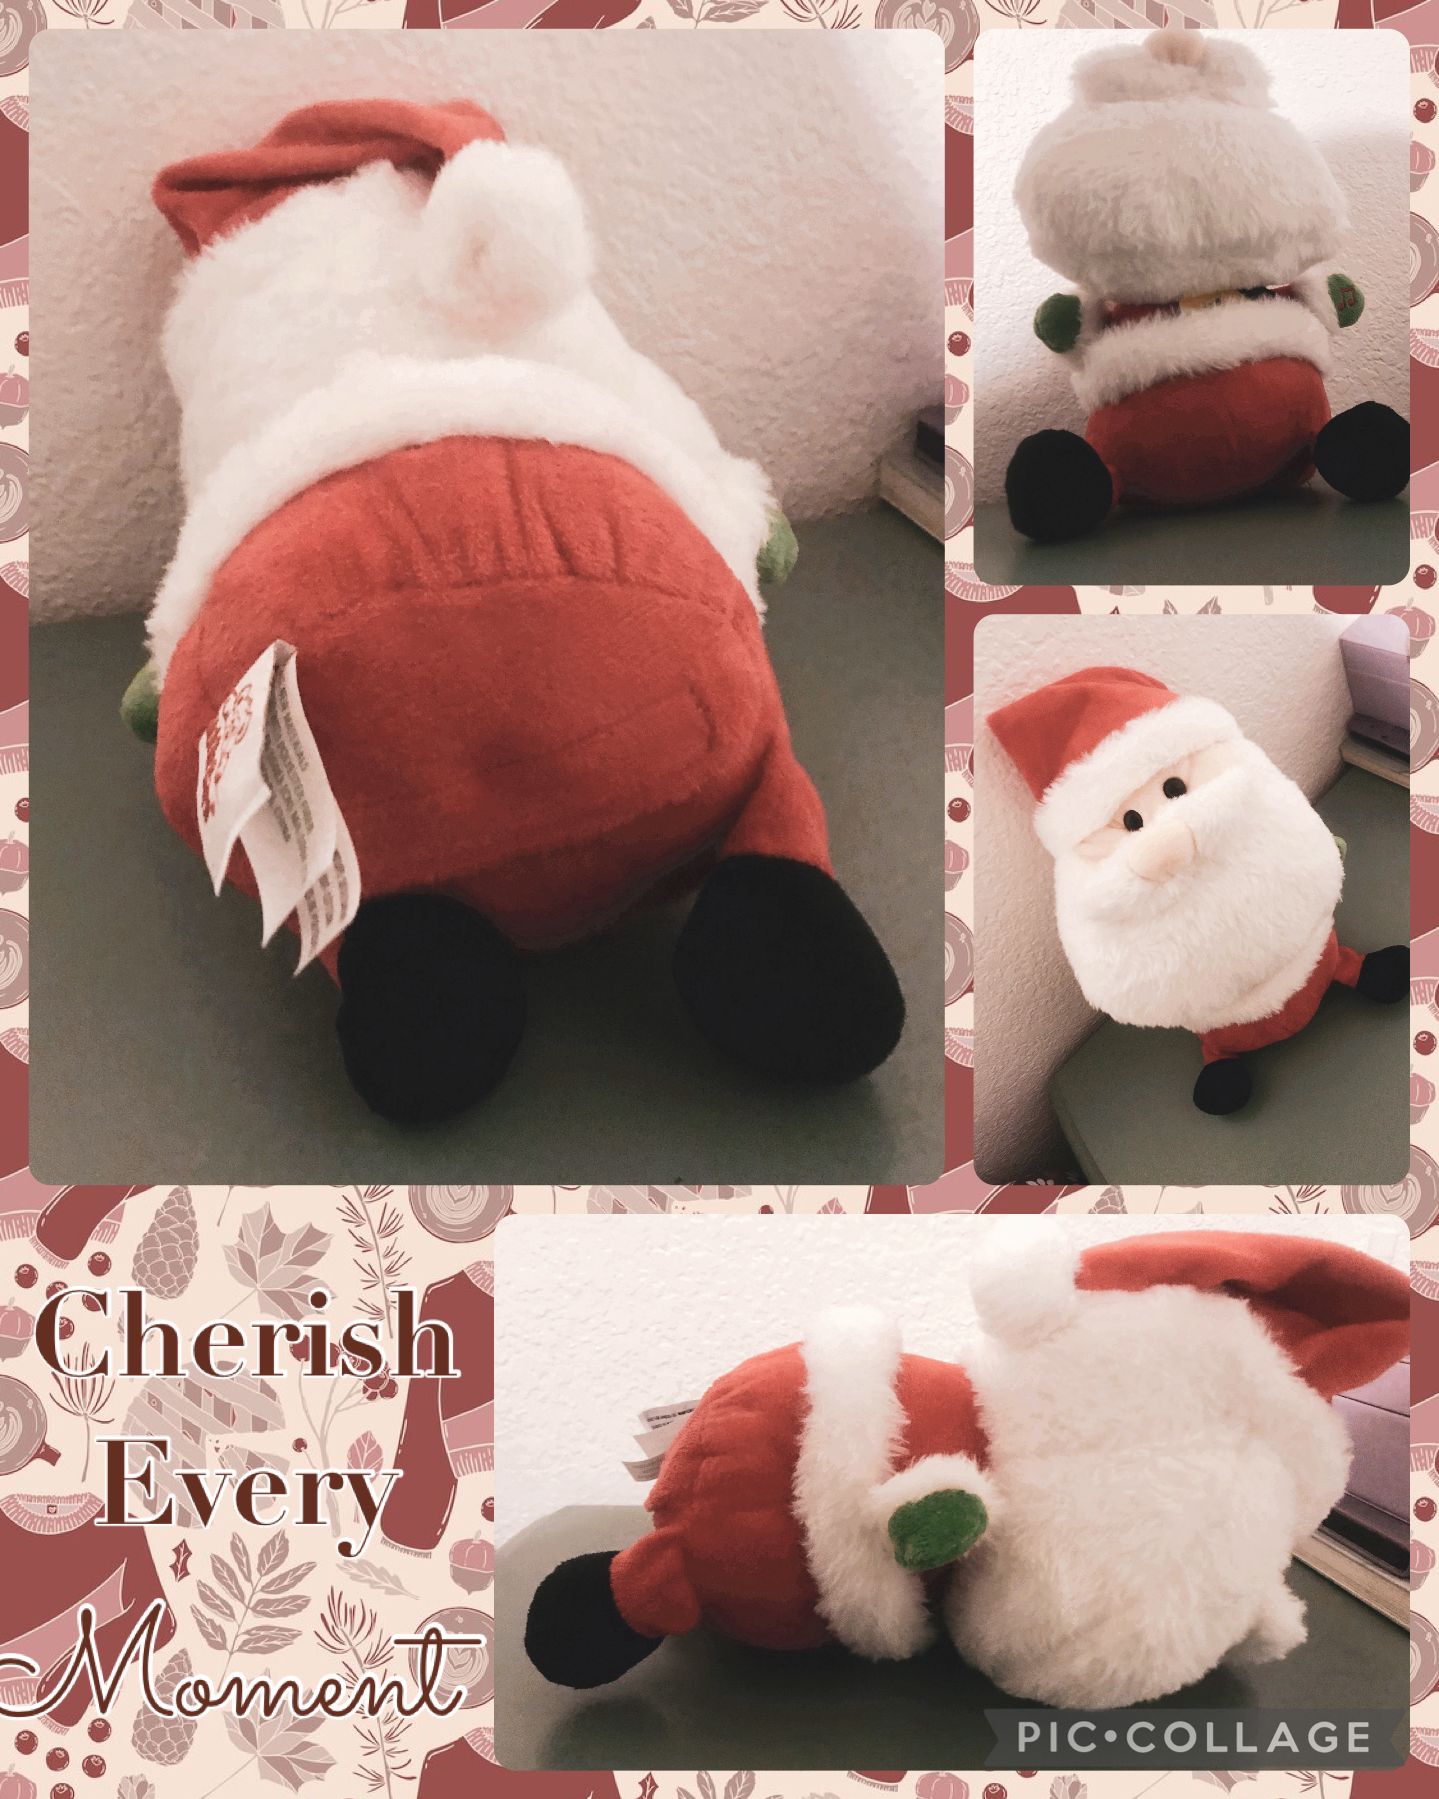 I LOVE THIS SANTA PLUSH ME AND MY SISTERS HAVE!! ITS SO CUTE I WANT MORE OF HIM! HE EVEN SINGS AND I JUST CANY